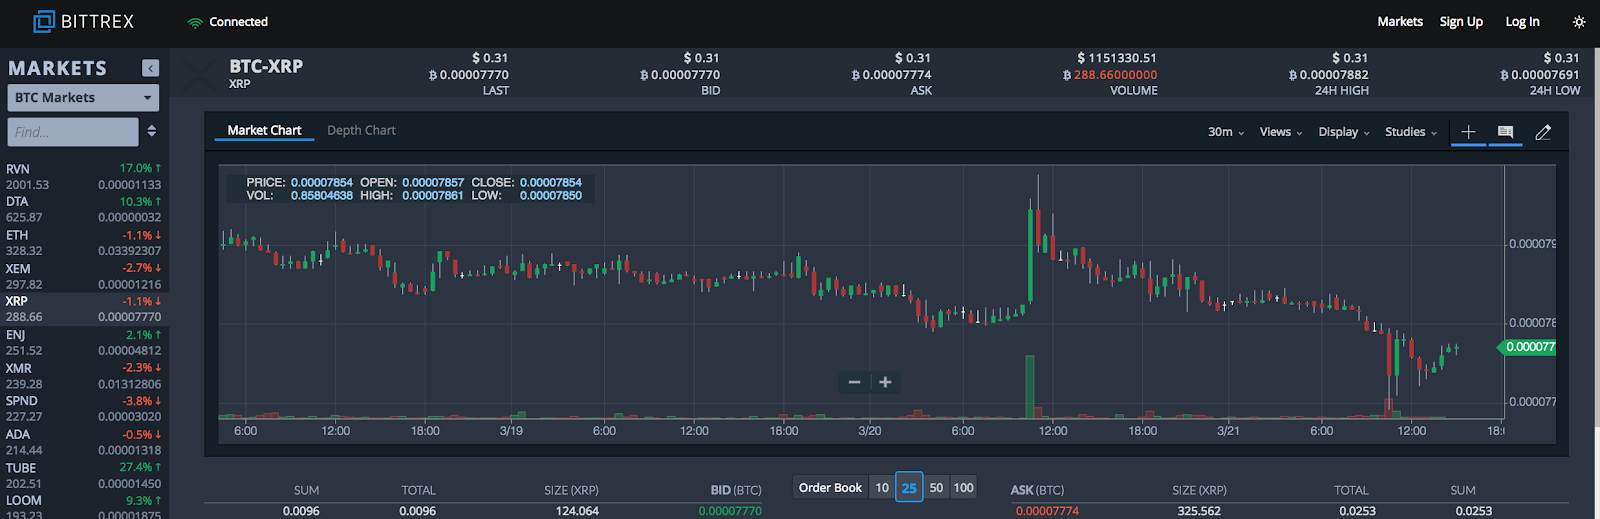 A Beginner's Guide to Trading on Bittrex - 1